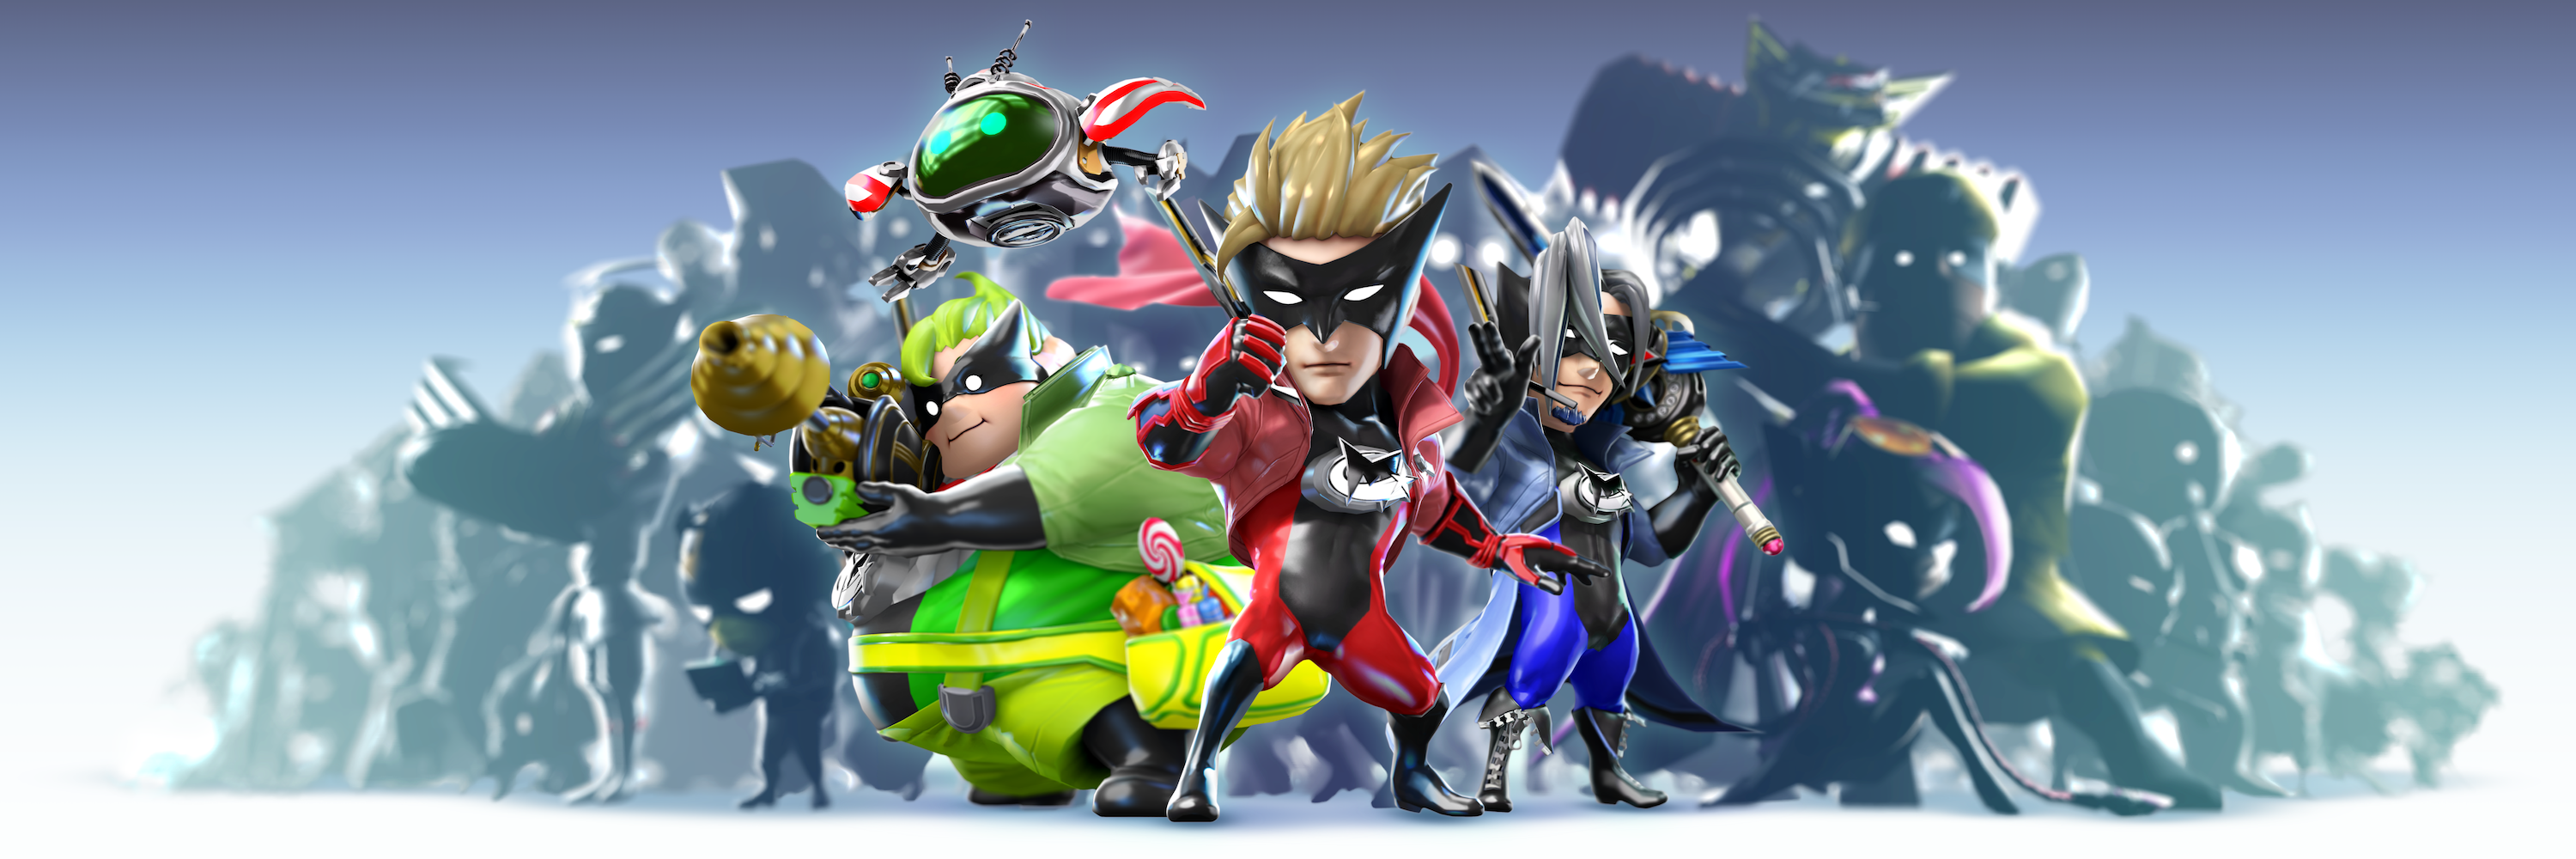 The 10 Best PlatinumGames Games, Ranked (According To Metacritic)